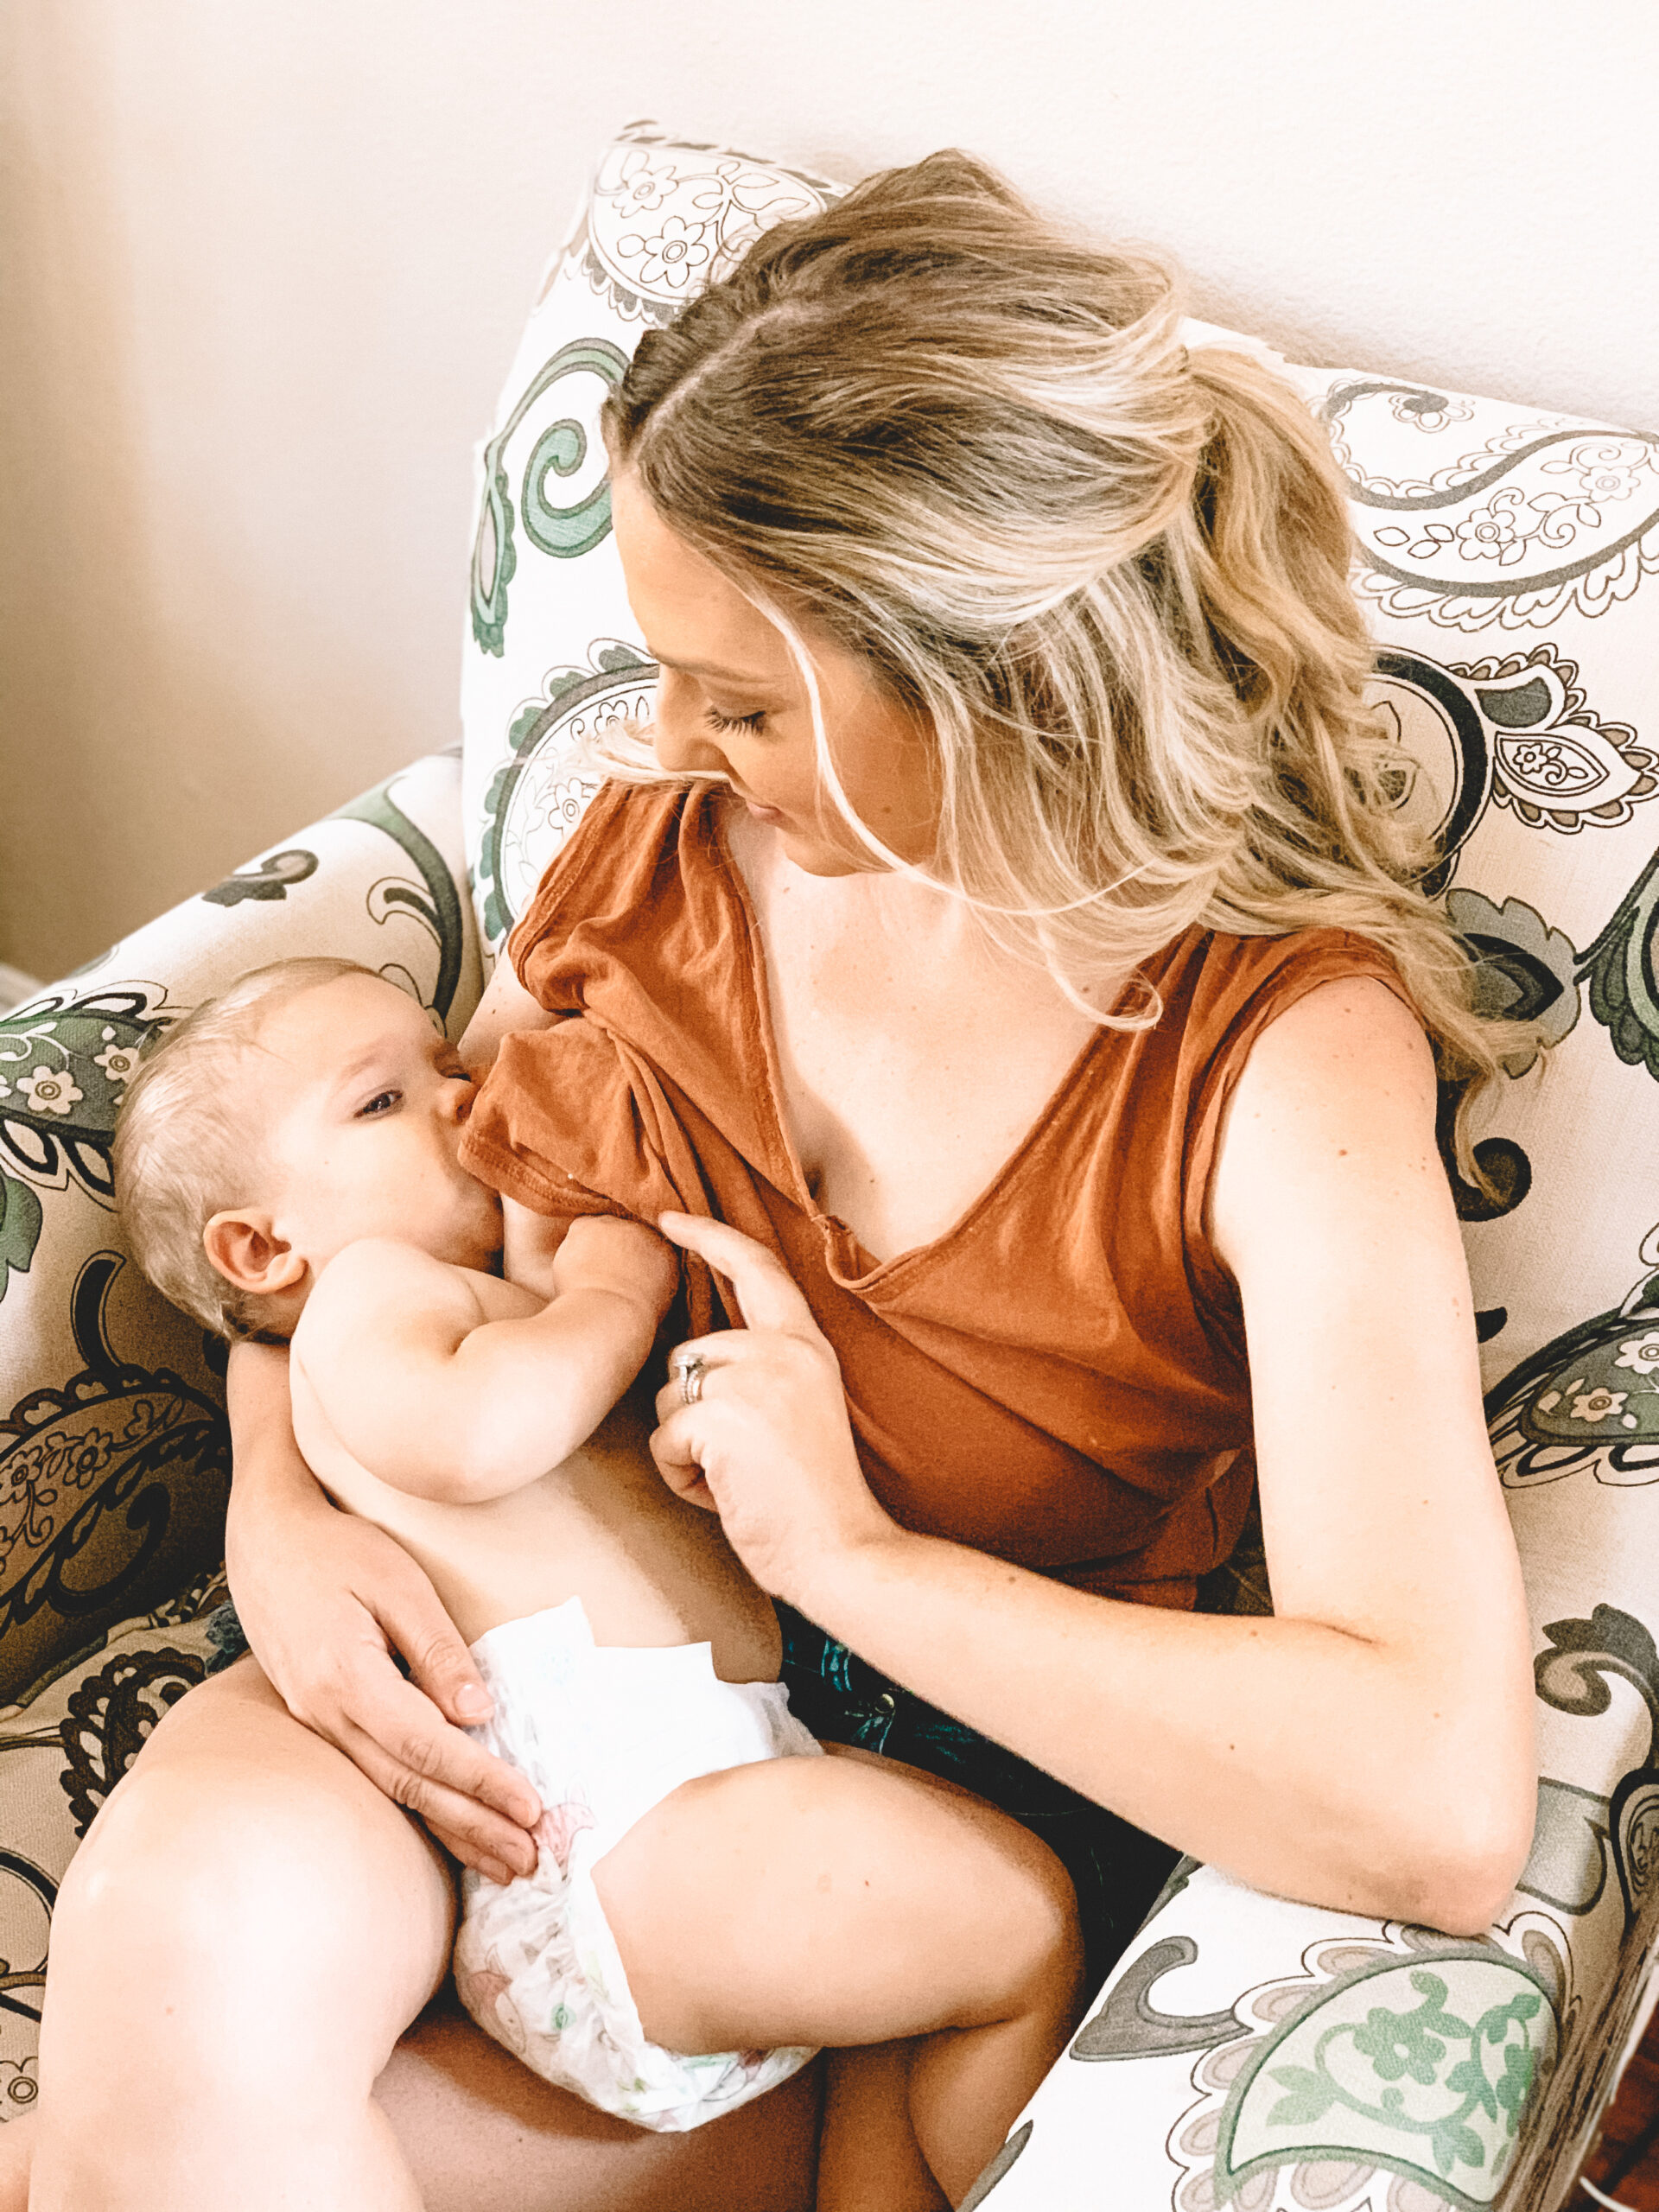 Breastfeeding 101: What You Need To Know About Breastfeeding